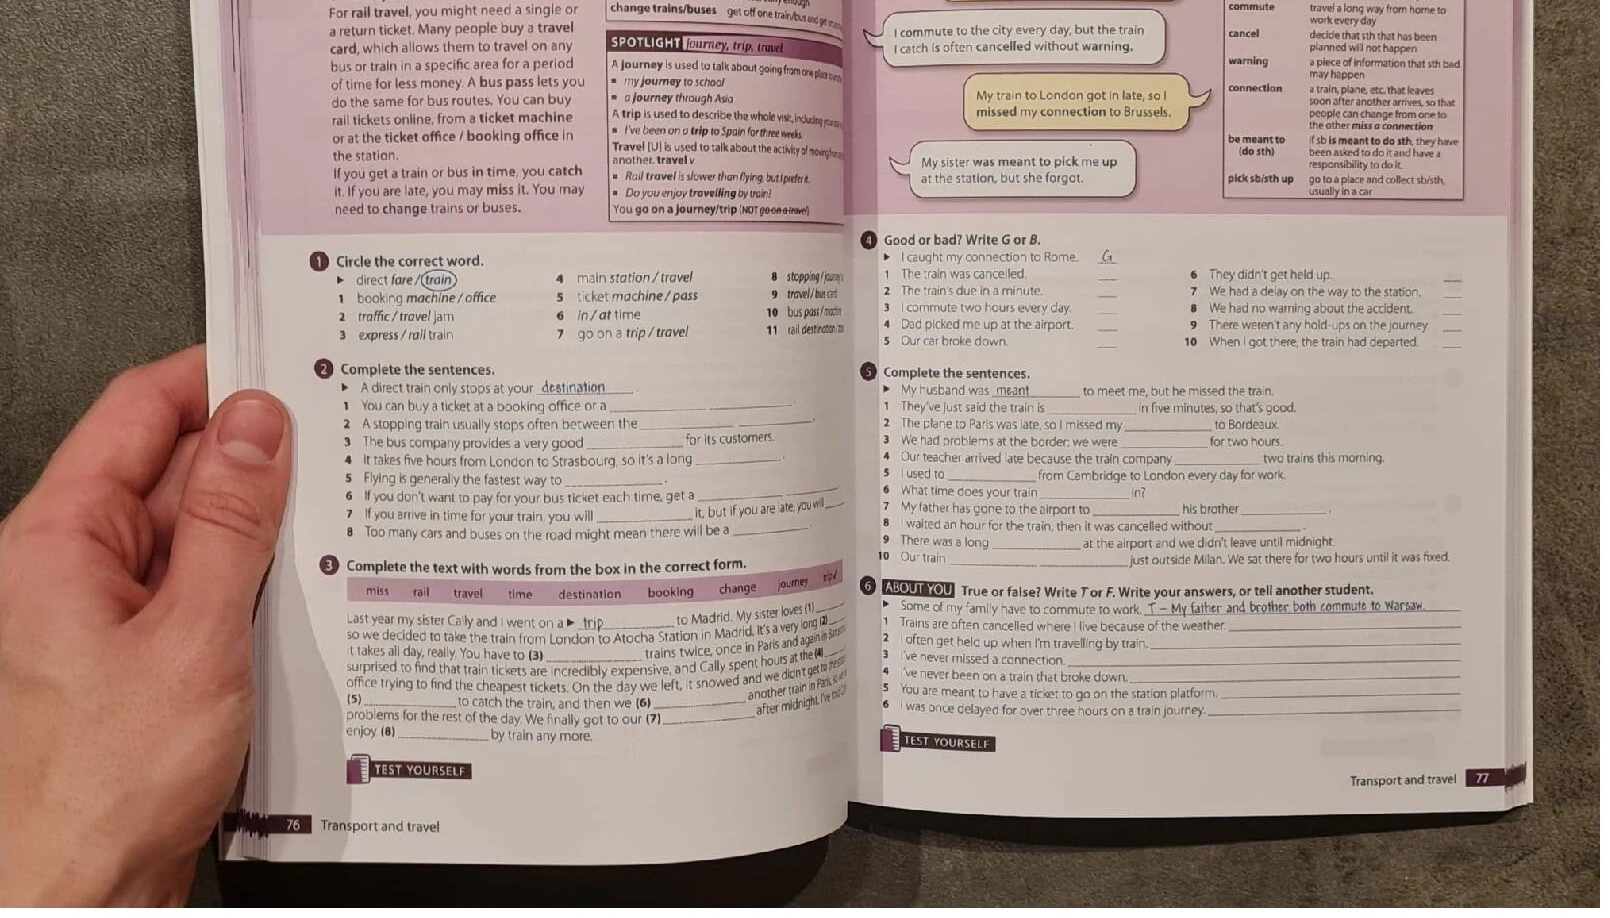 Photo of a business English textbook